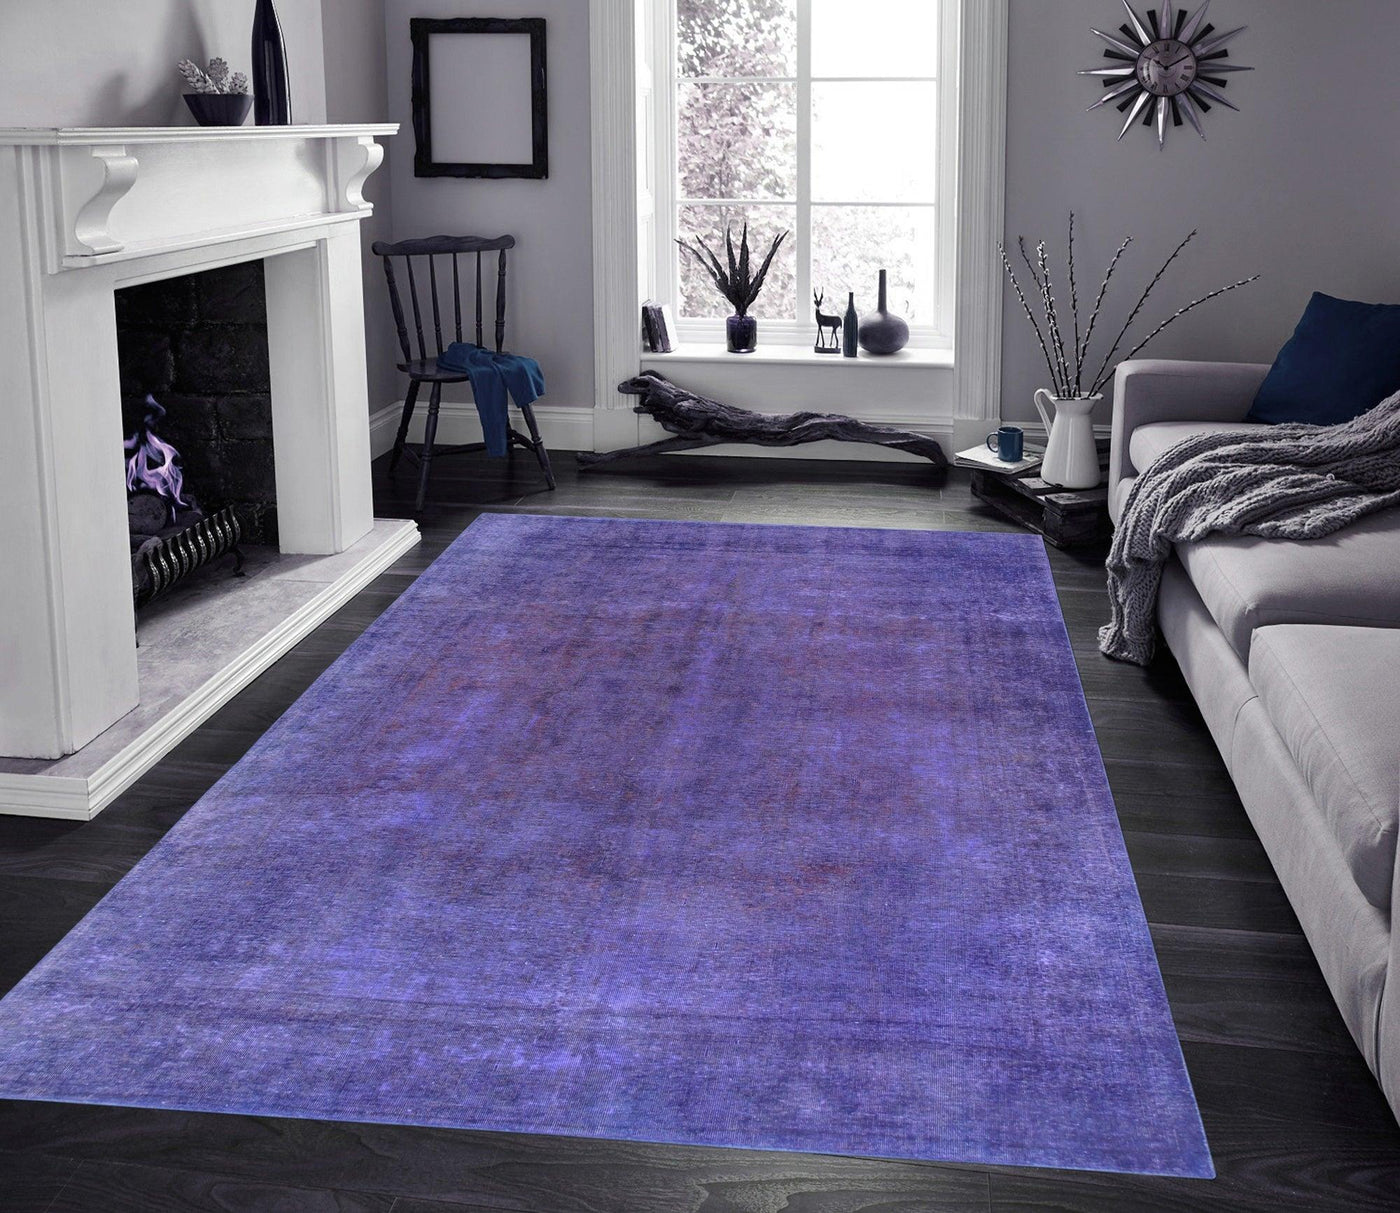 Canvello Vintage Overdyed Purple Area Rug - 8' X 10'6"